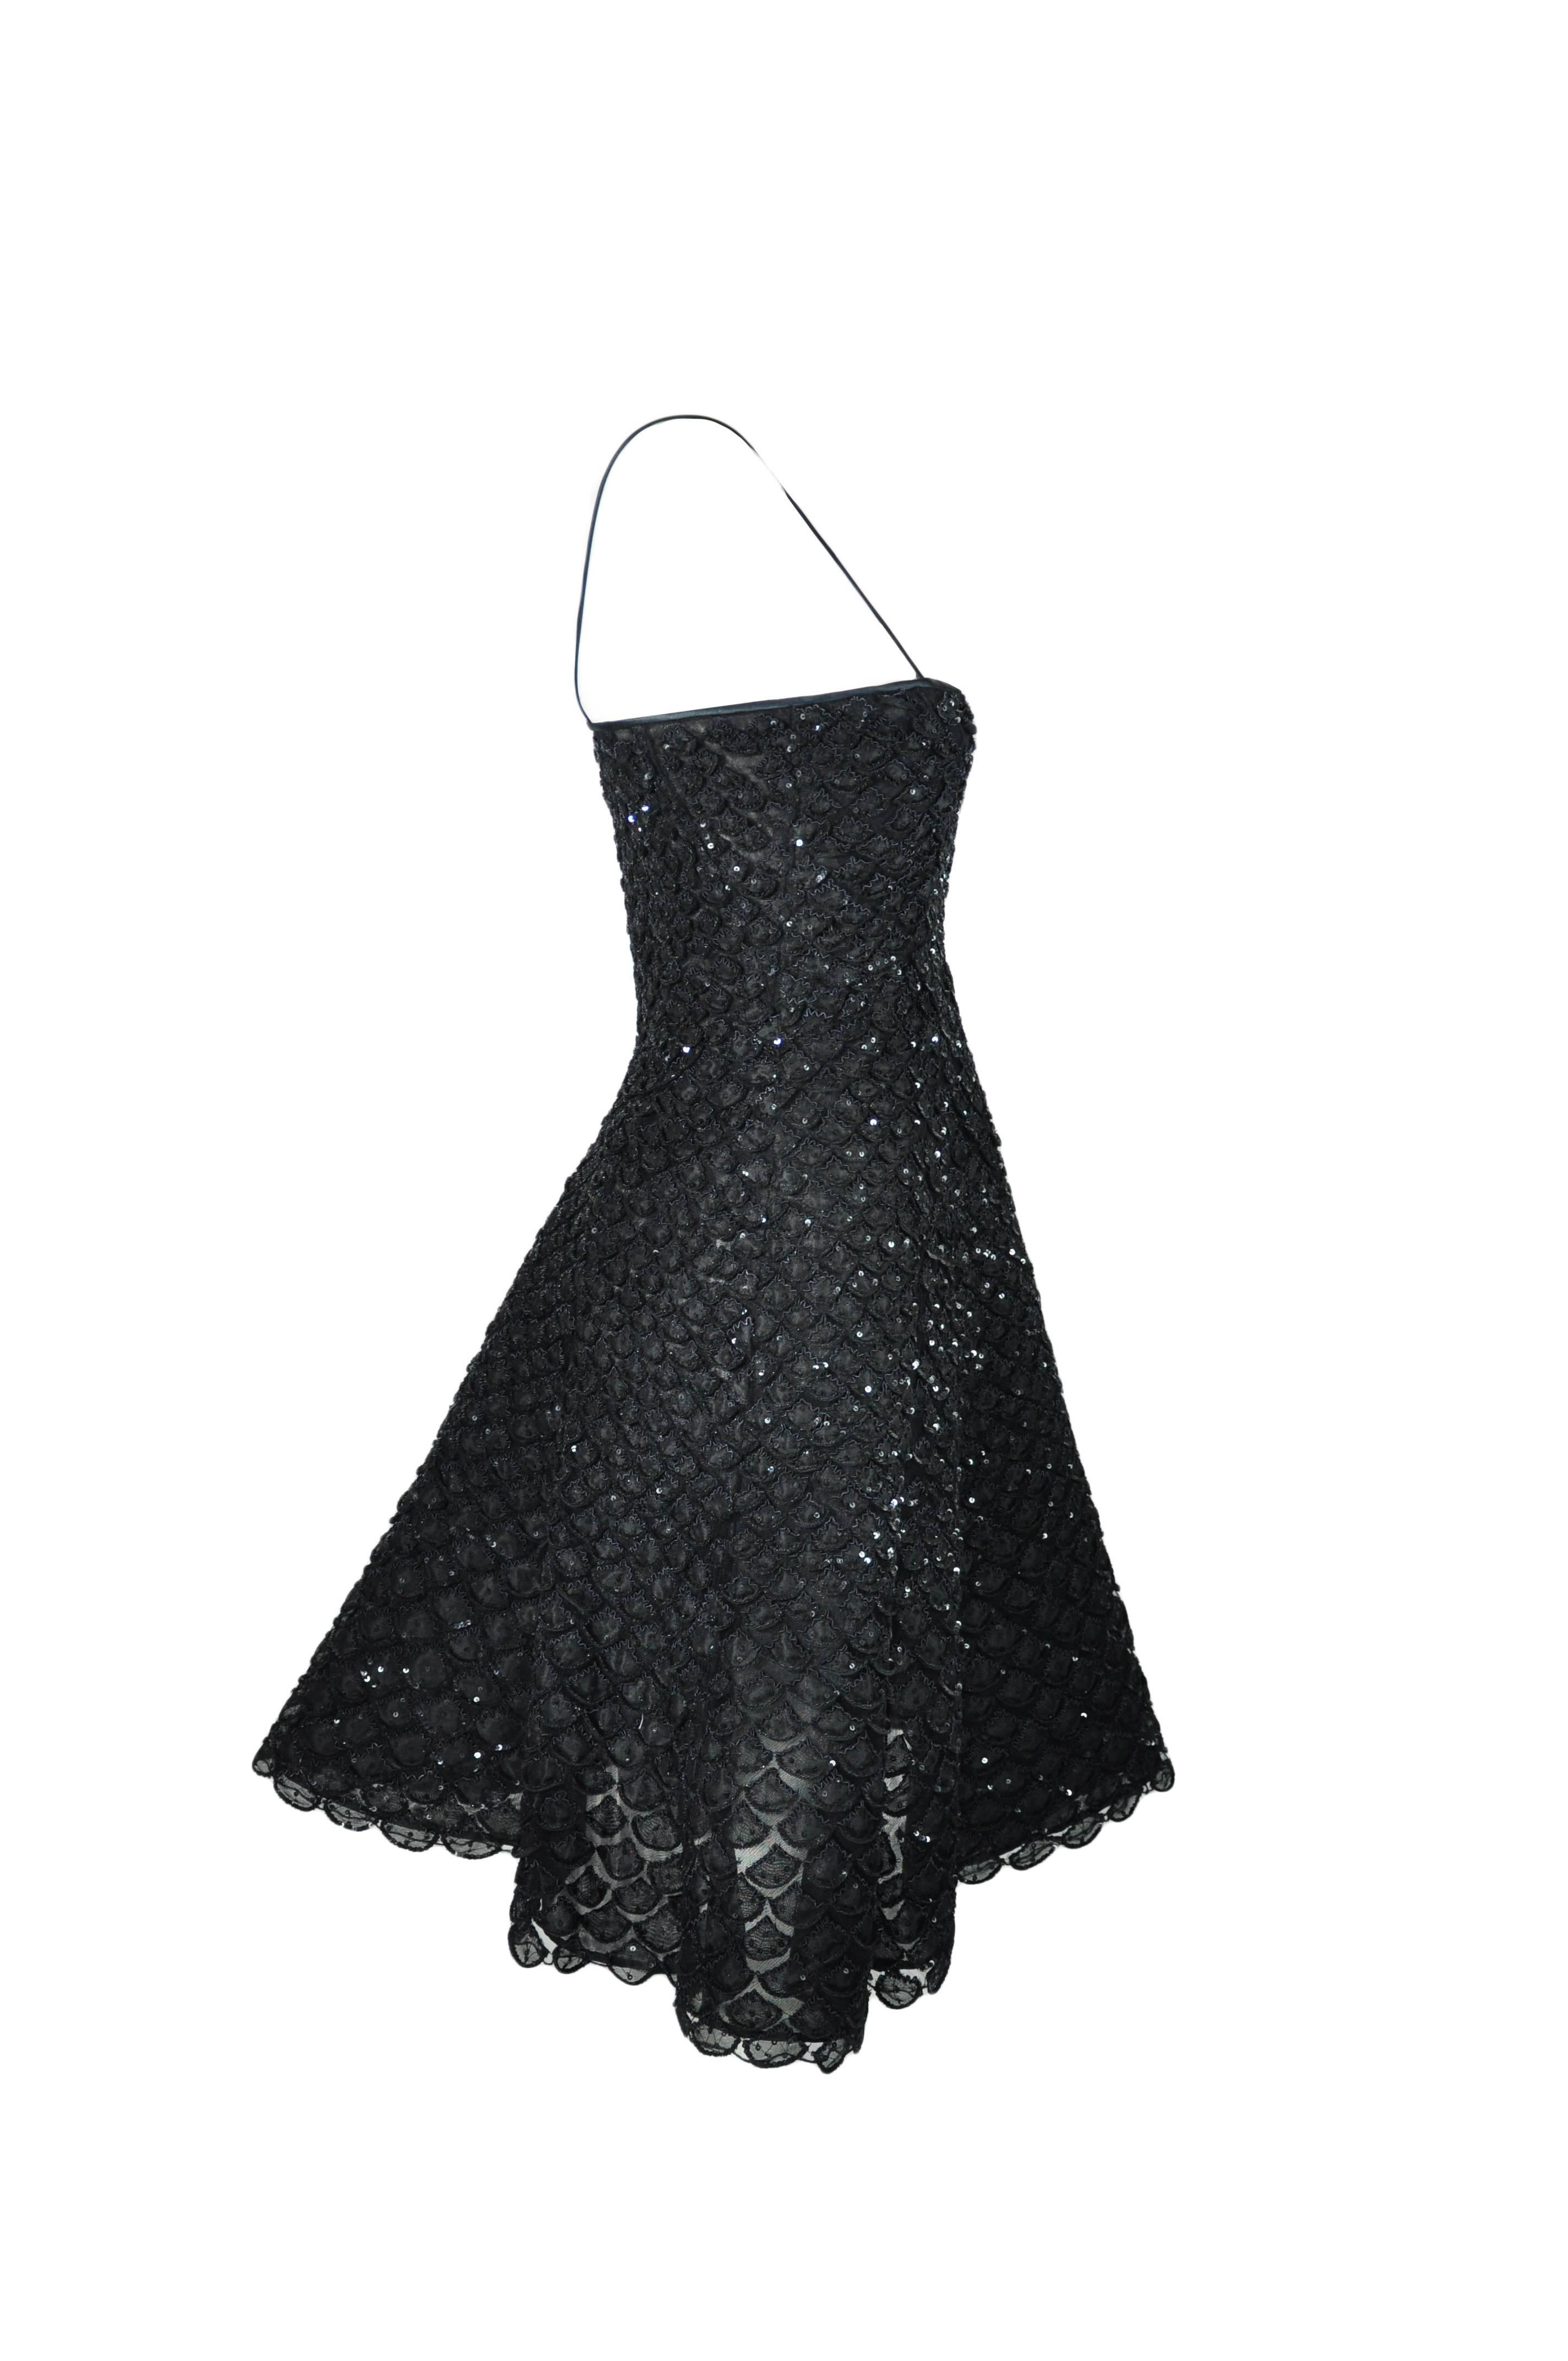 Giorgio Armani Fit & Flare Sequin Appliques Black Mini Evening Dress In Excellent Condition For Sale In Hong Kong, Hong Kong